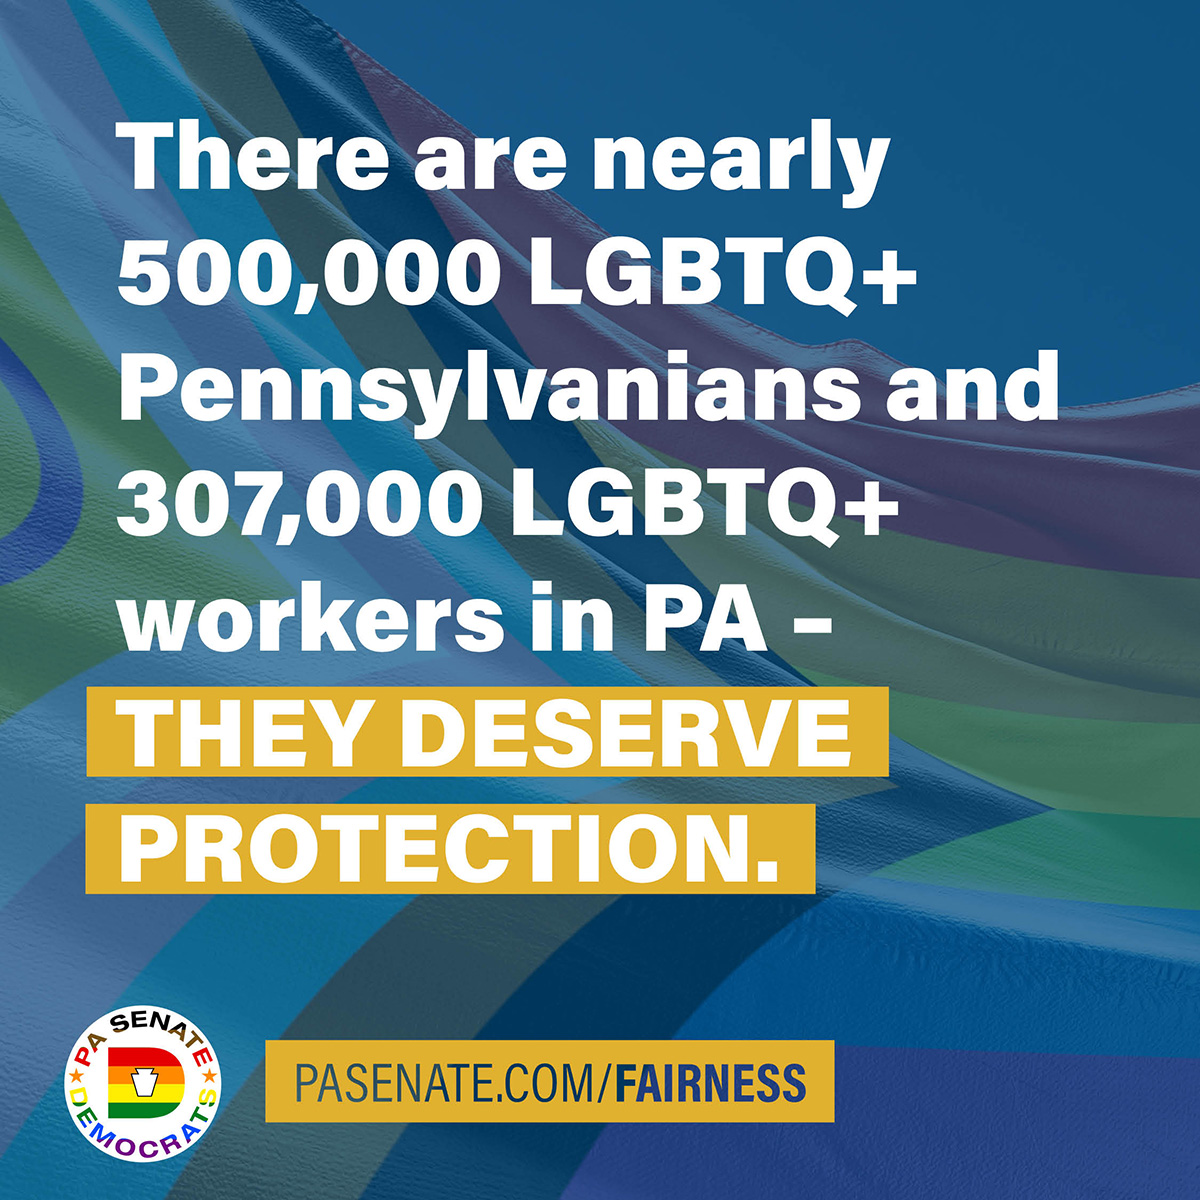 There are nearly 500,000 LGBTQ+ Pennsylvanians and 307,000 LGBTQ+ workers in PA – THEY DESERVE PROTECTION.